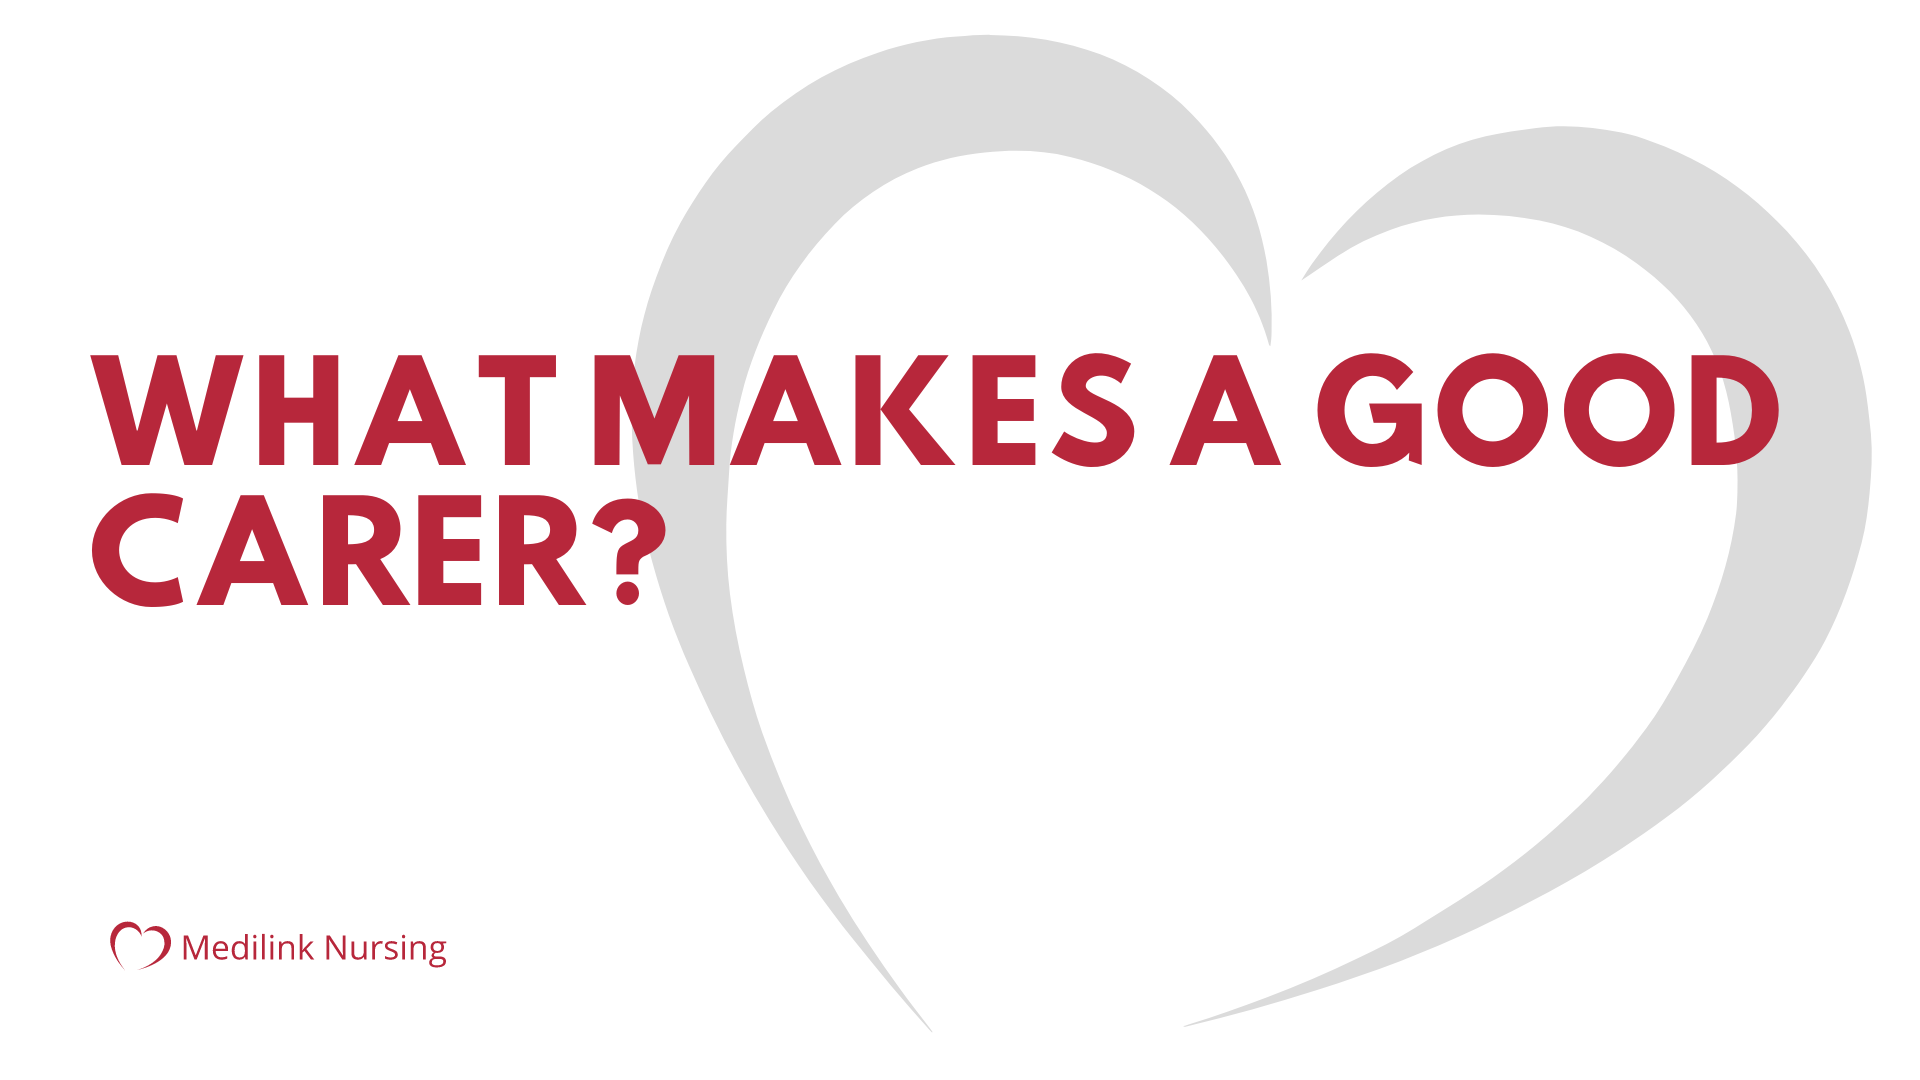 What Makes A Good Carer? 5 Qualities That Make A Good Carer